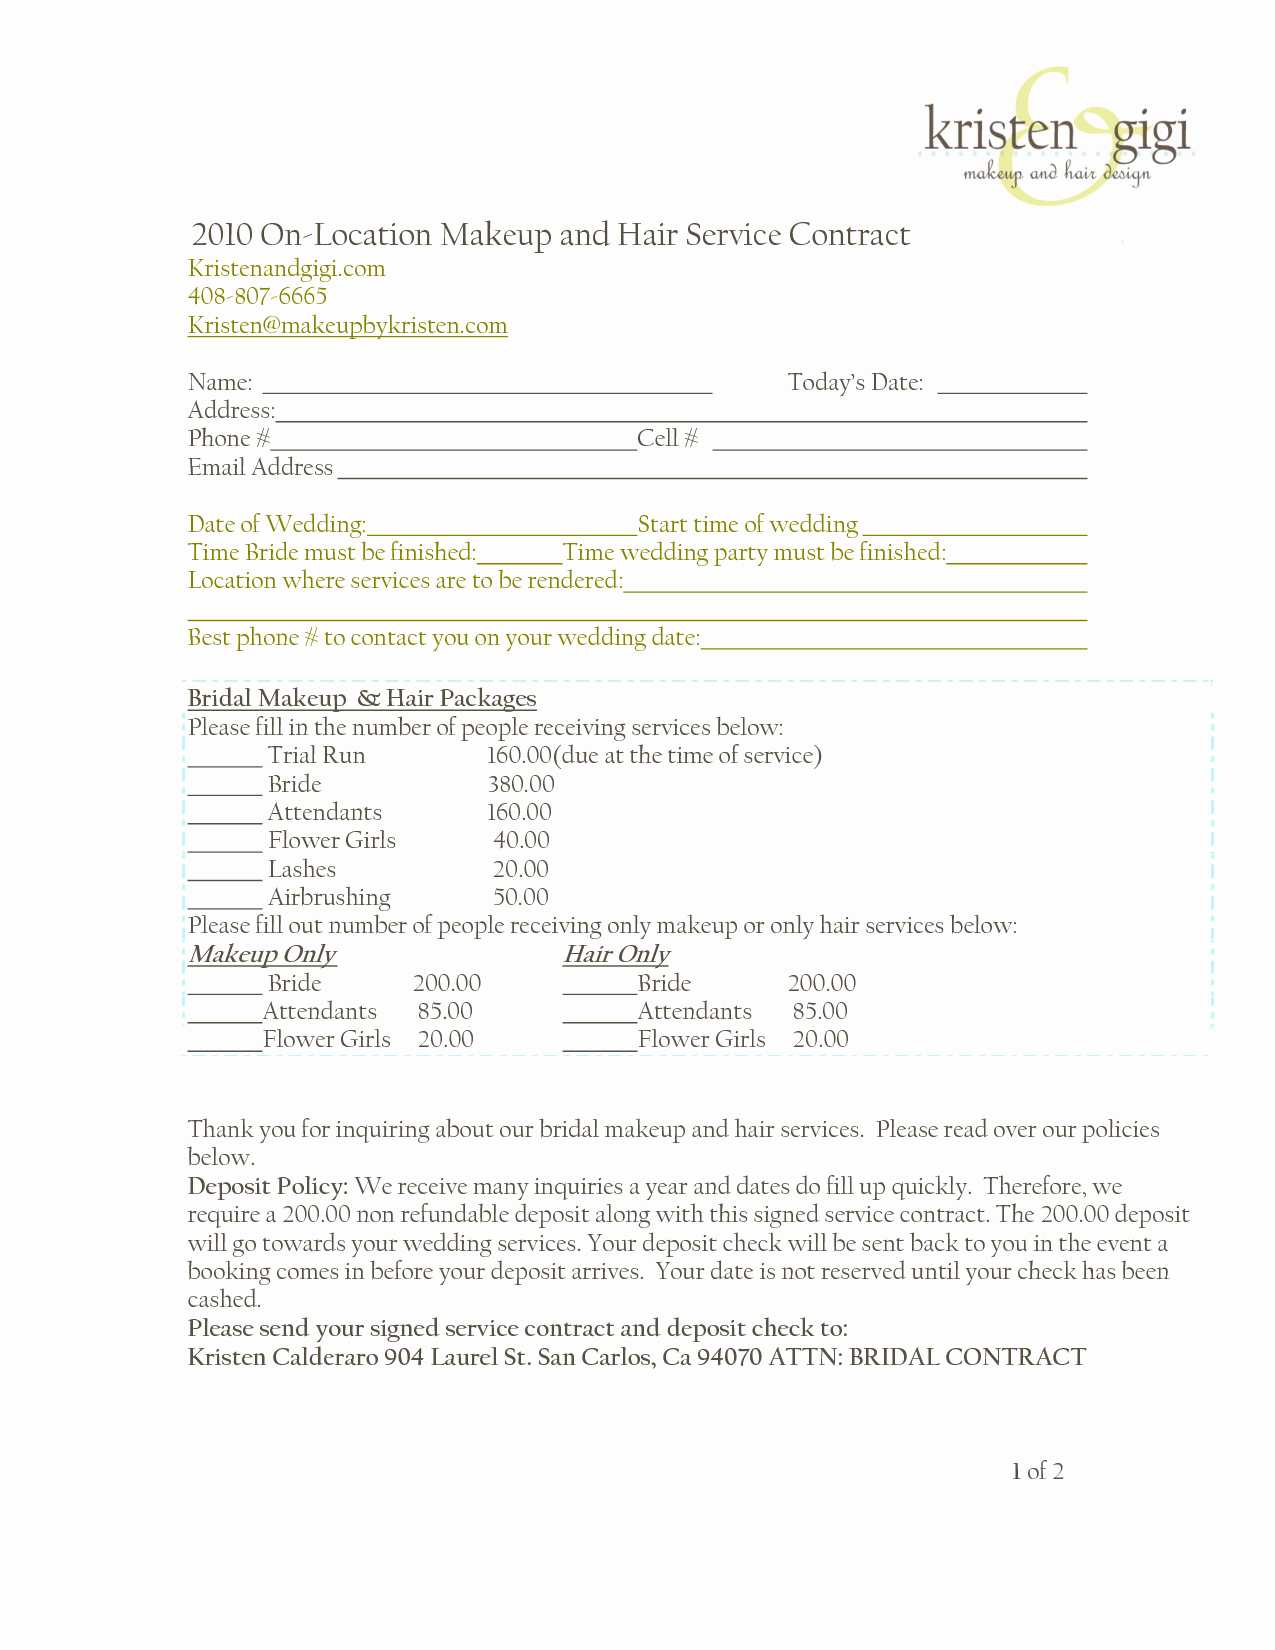 Makeup Artist Contract Template Free Inspirational Bridalhaircotract